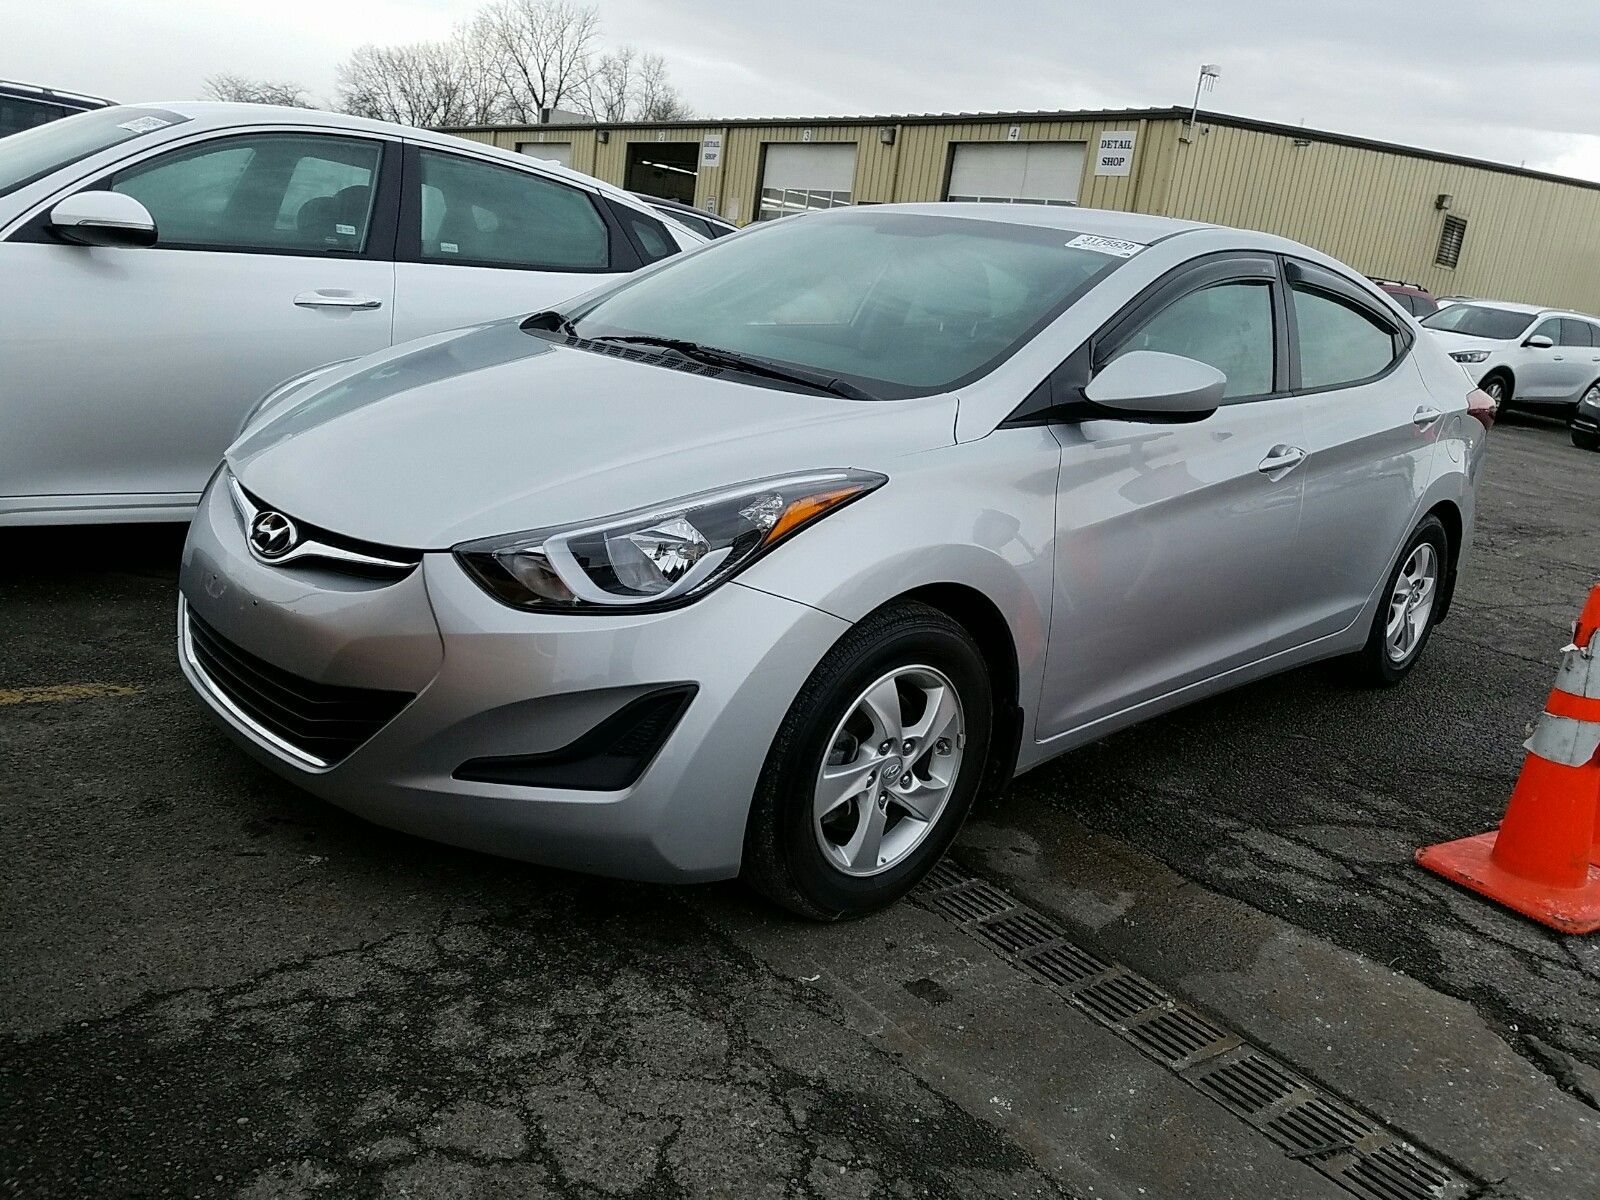 2014 HYUNDAI ELANTRA Specifications and Details for VIN